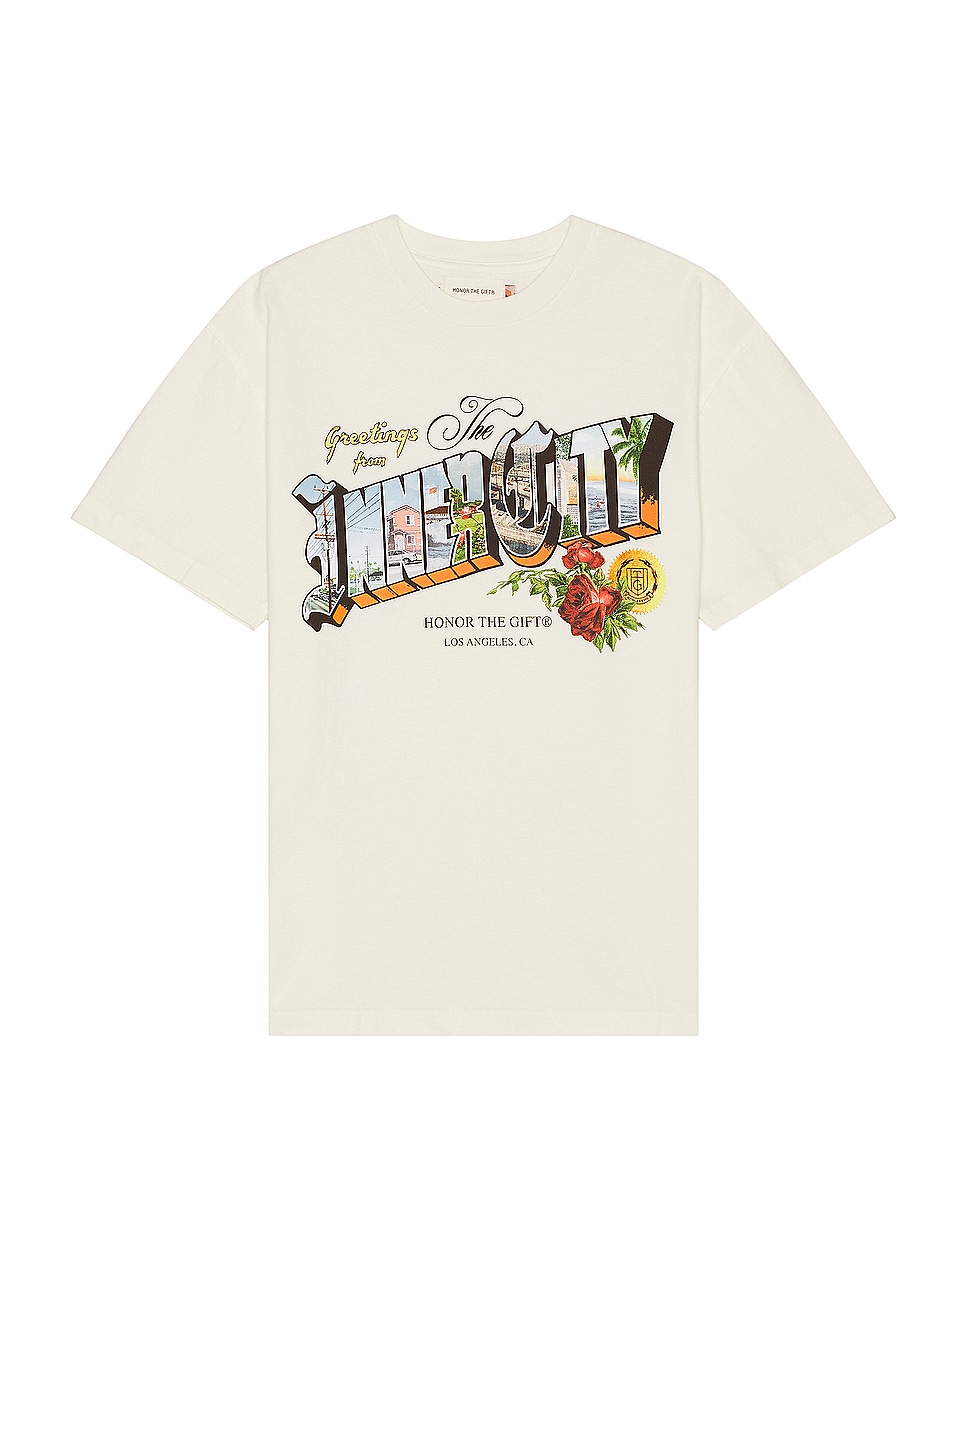 Image 1 of Honor The Gift Greetings 2.0 Short Sleeve Tee in White